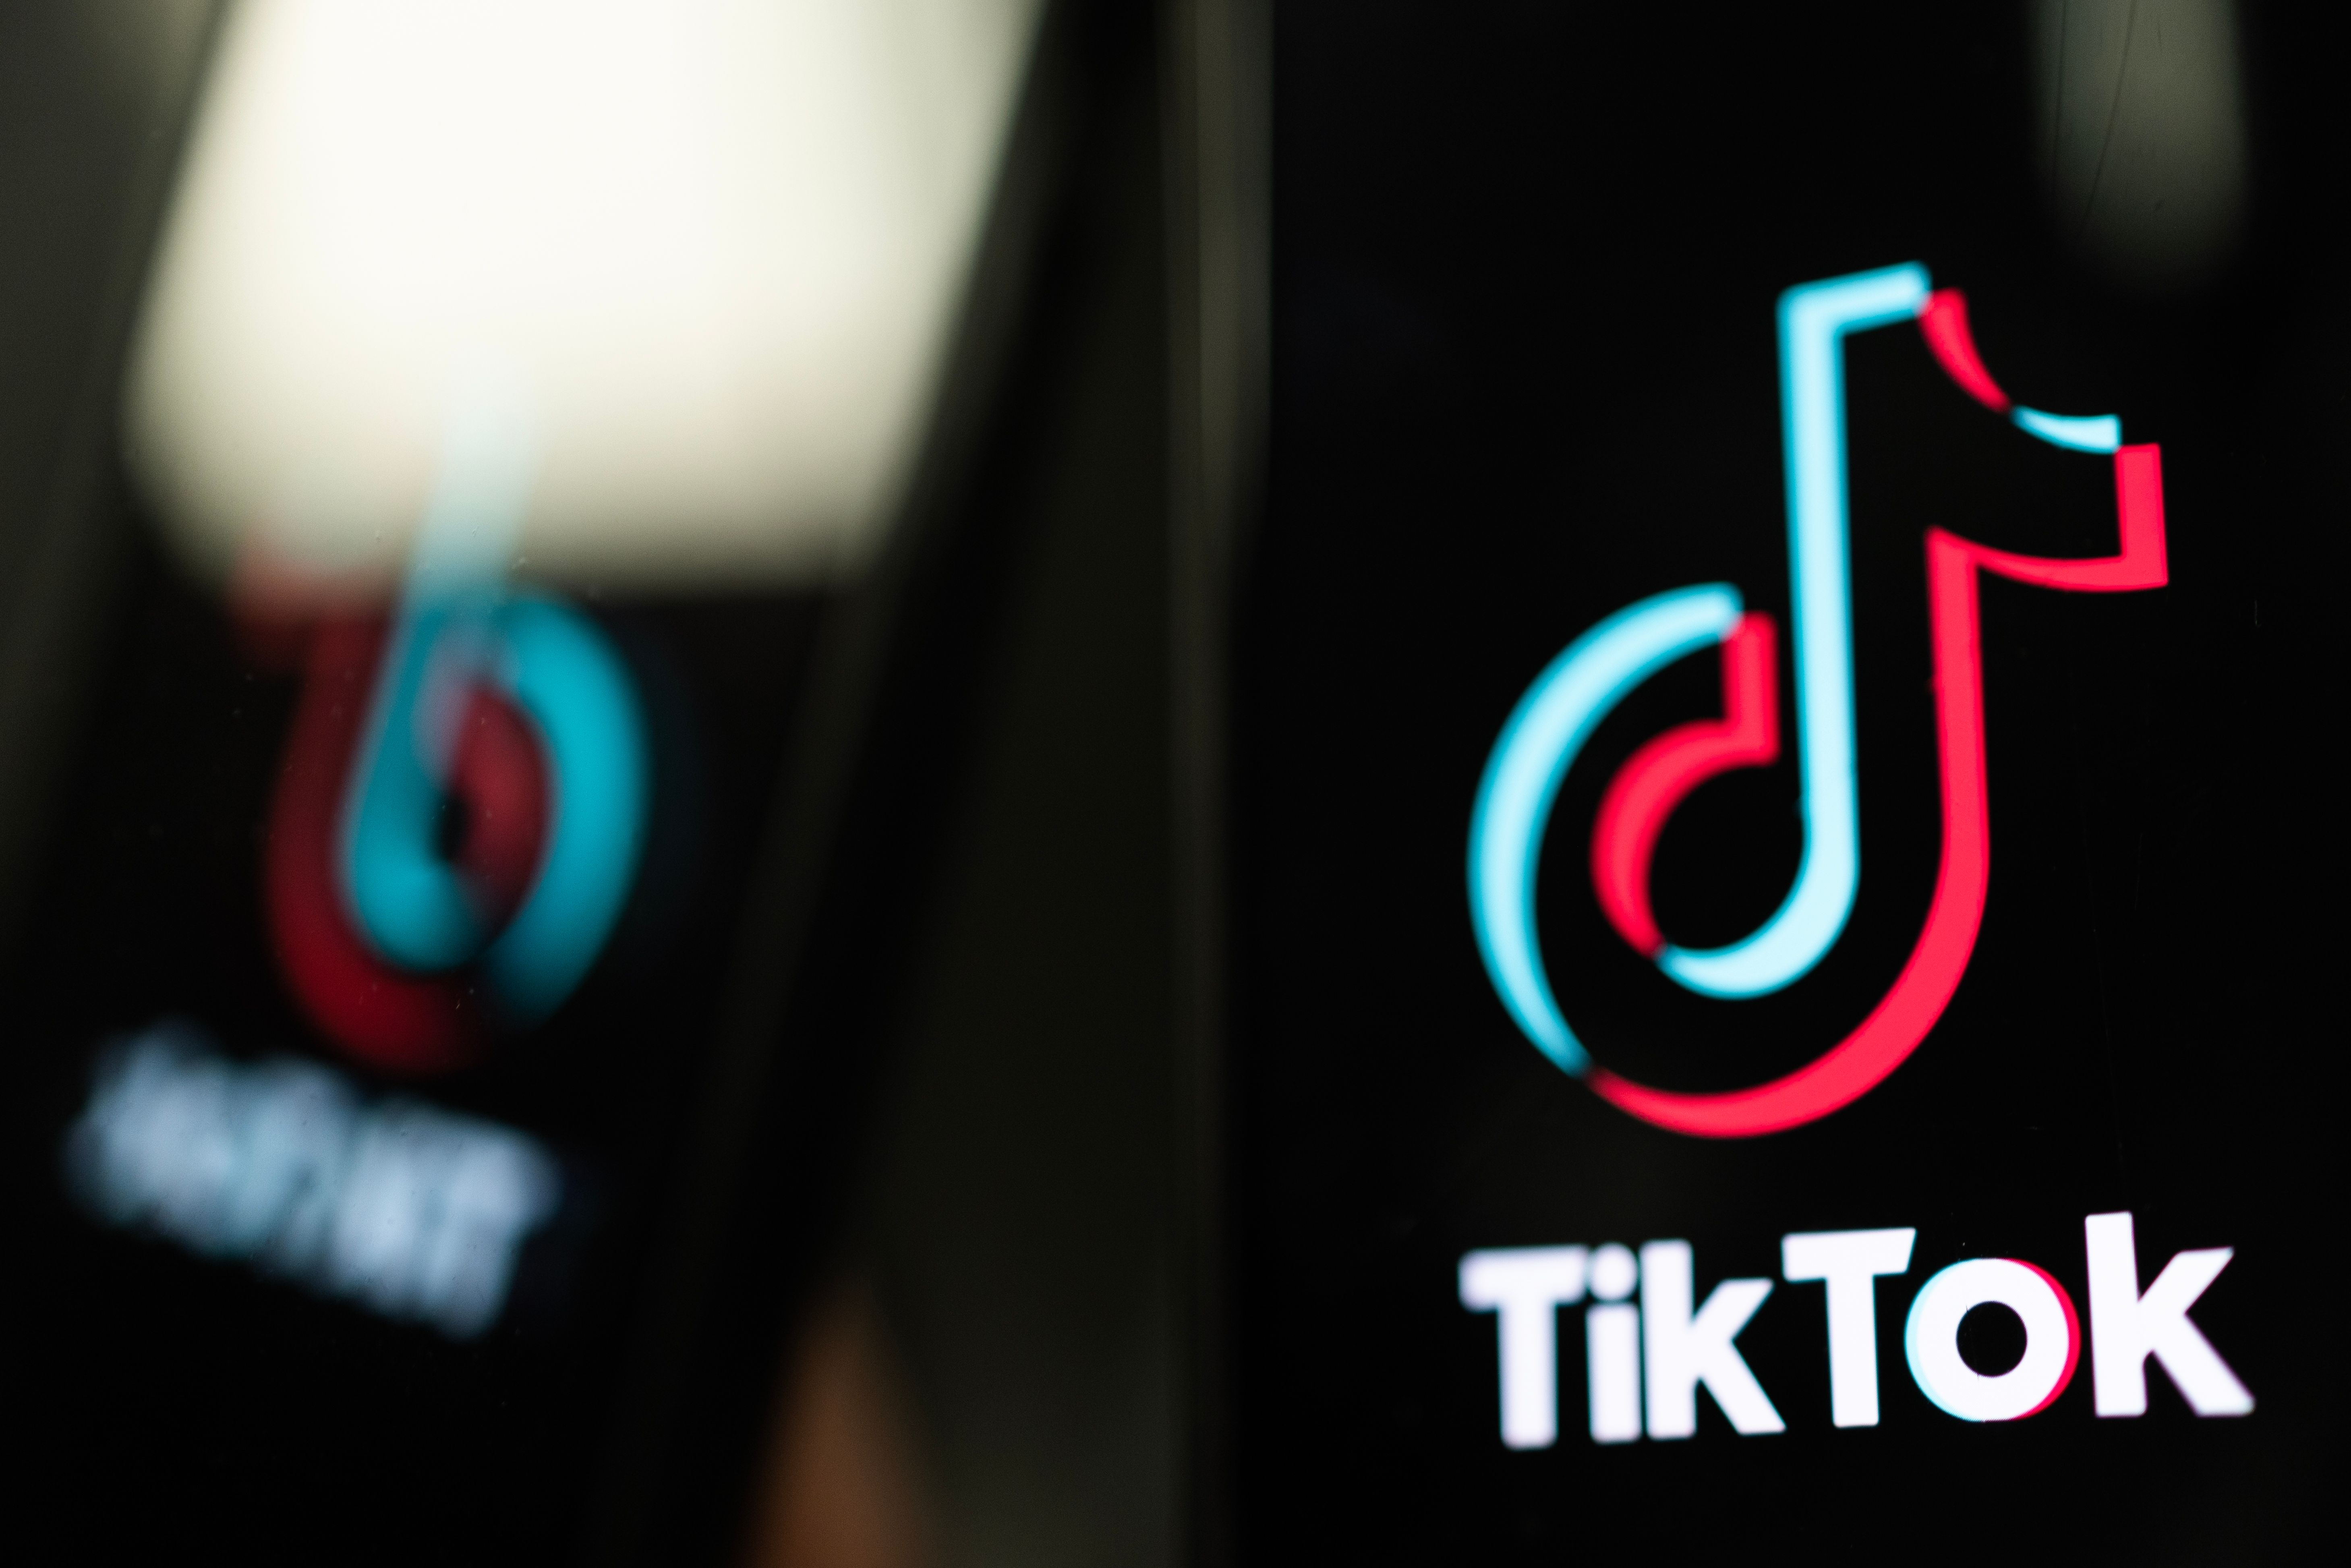 black friday subscription deals hbo｜TikTok Search